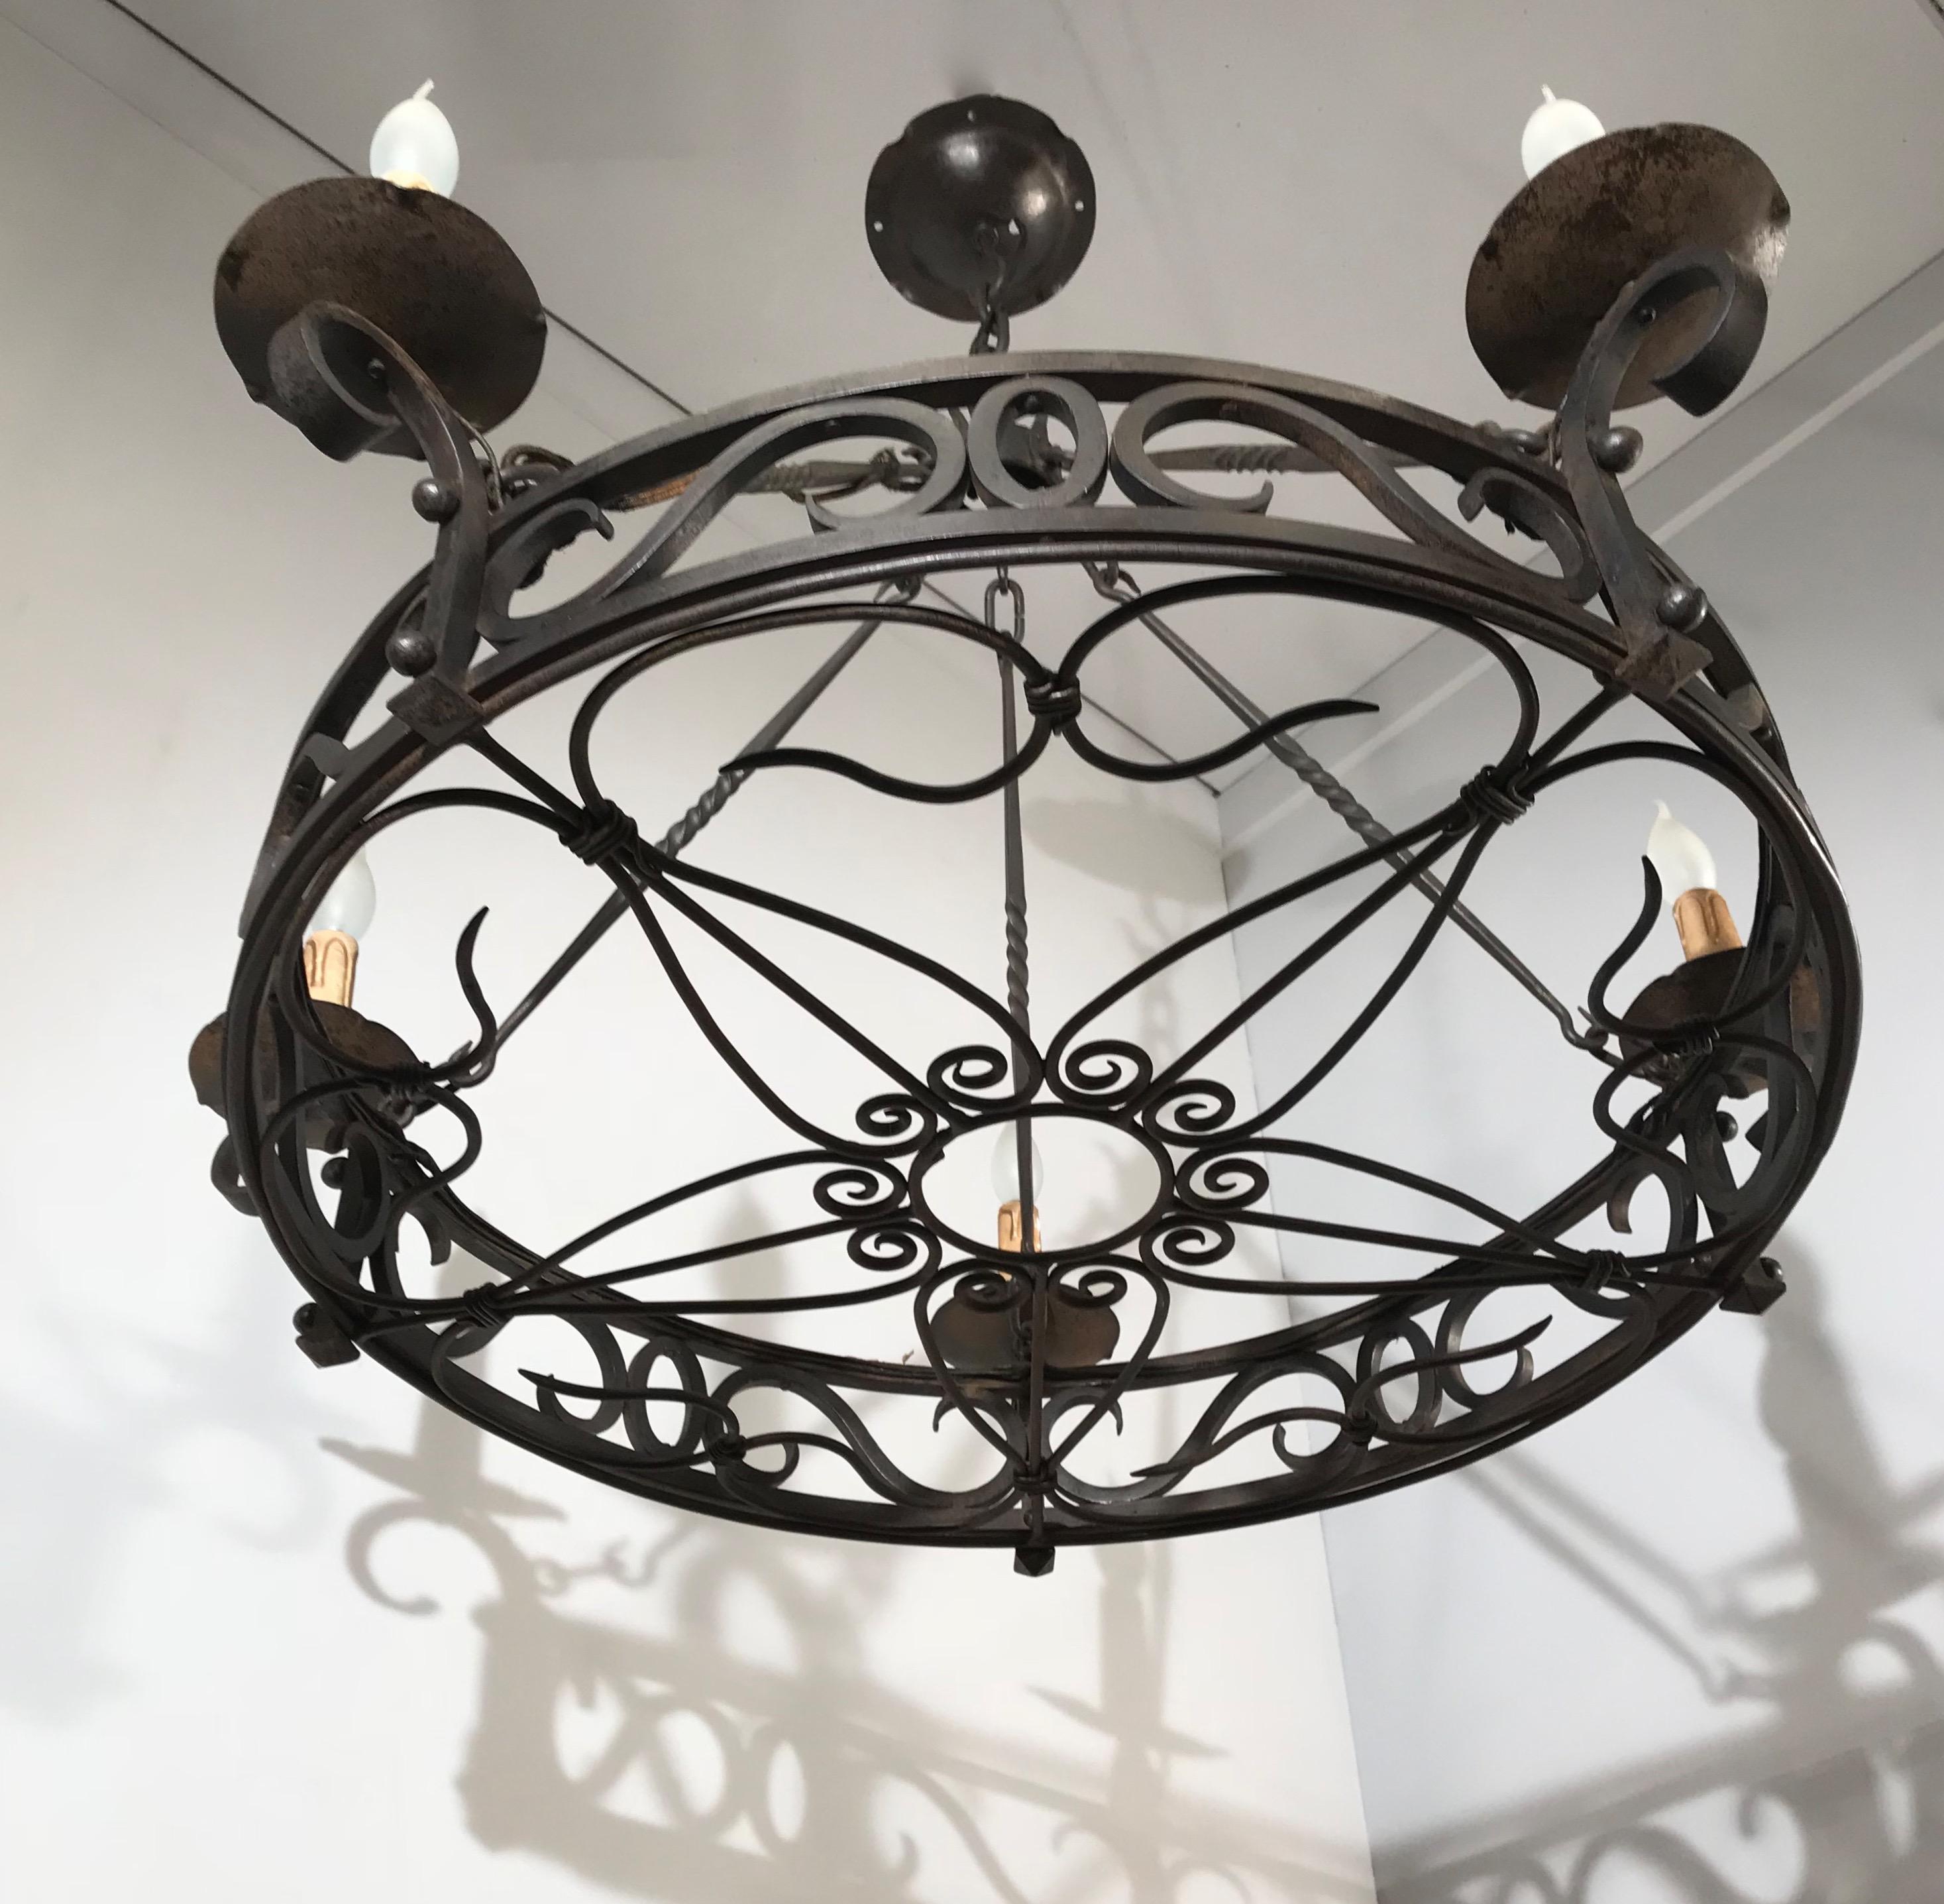 Large Arts & Crafts Wrought Iron Chandelier for Dining Room or Restaurant Etc. 11